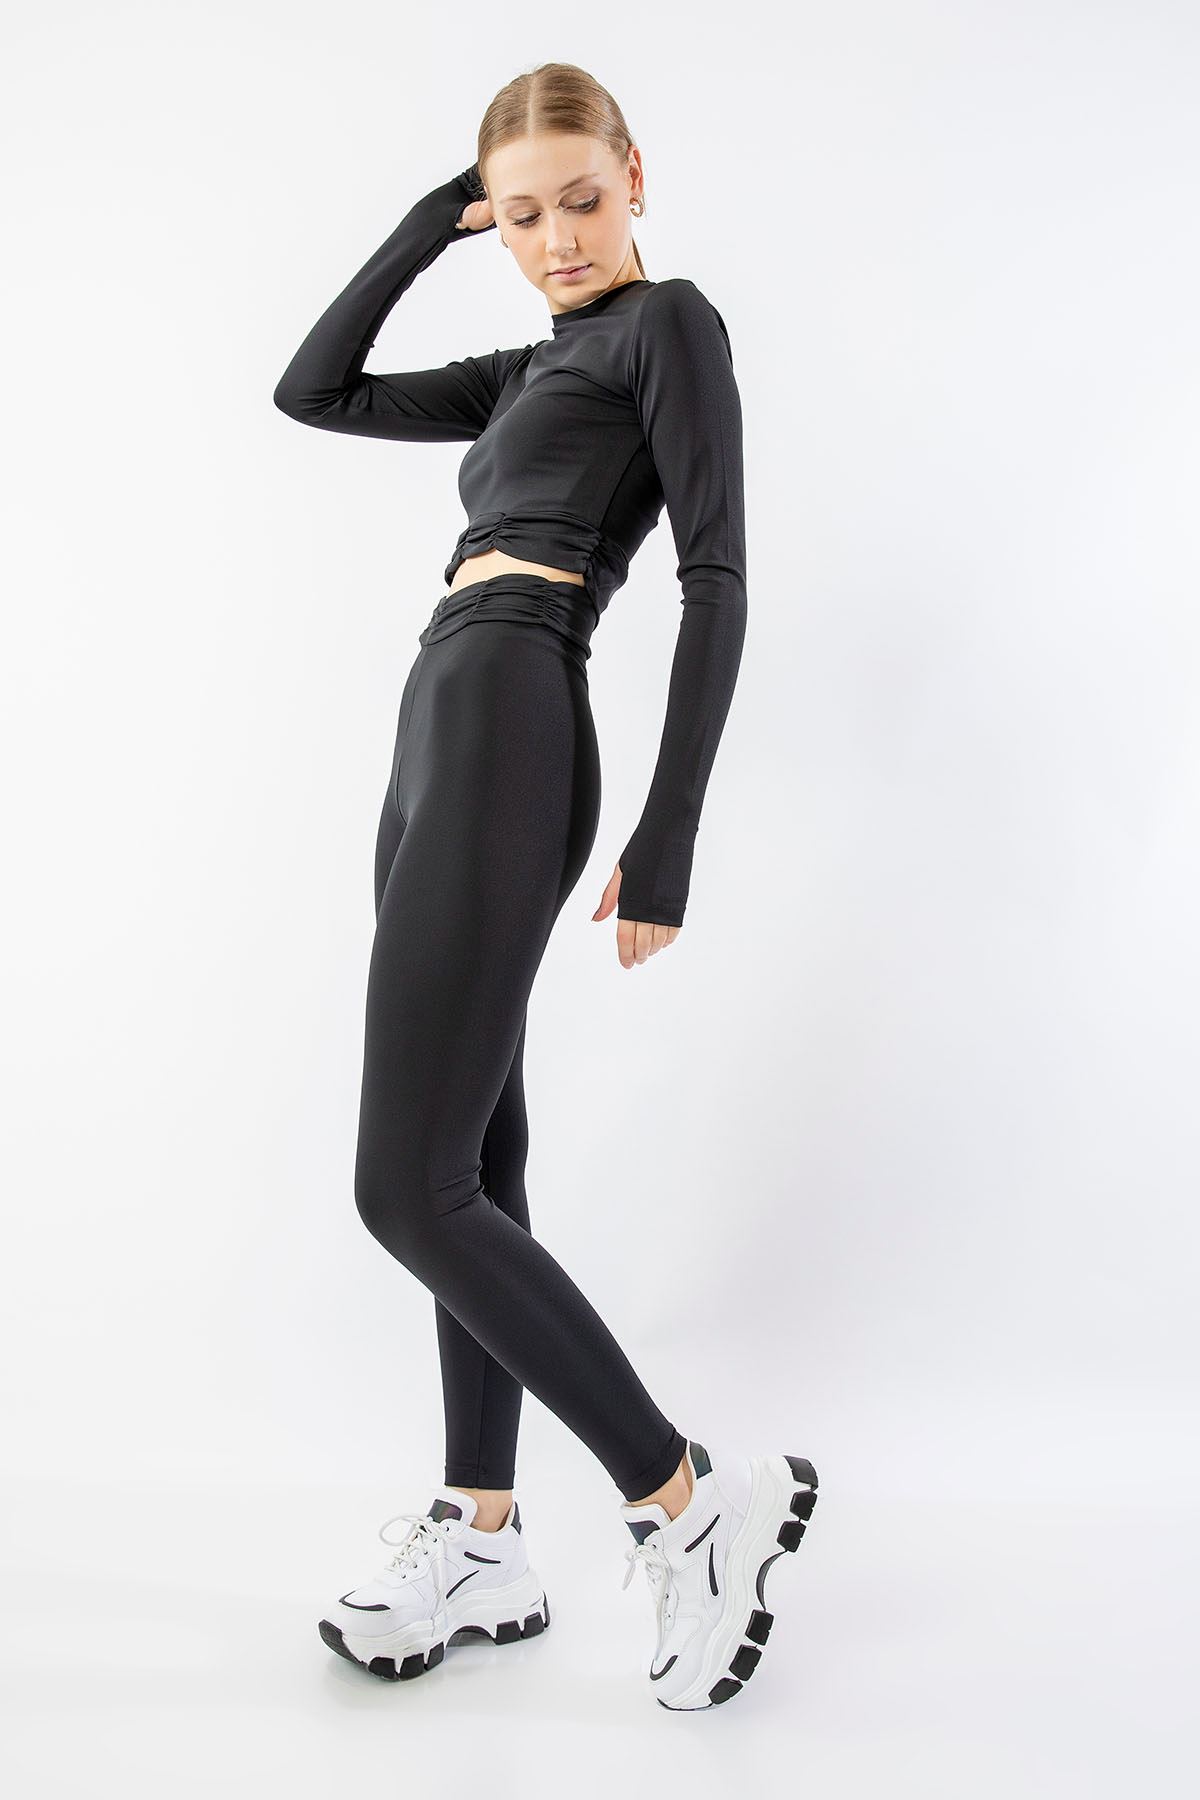 Scuba Fabric Long Shirred Women Tights Collection - Black